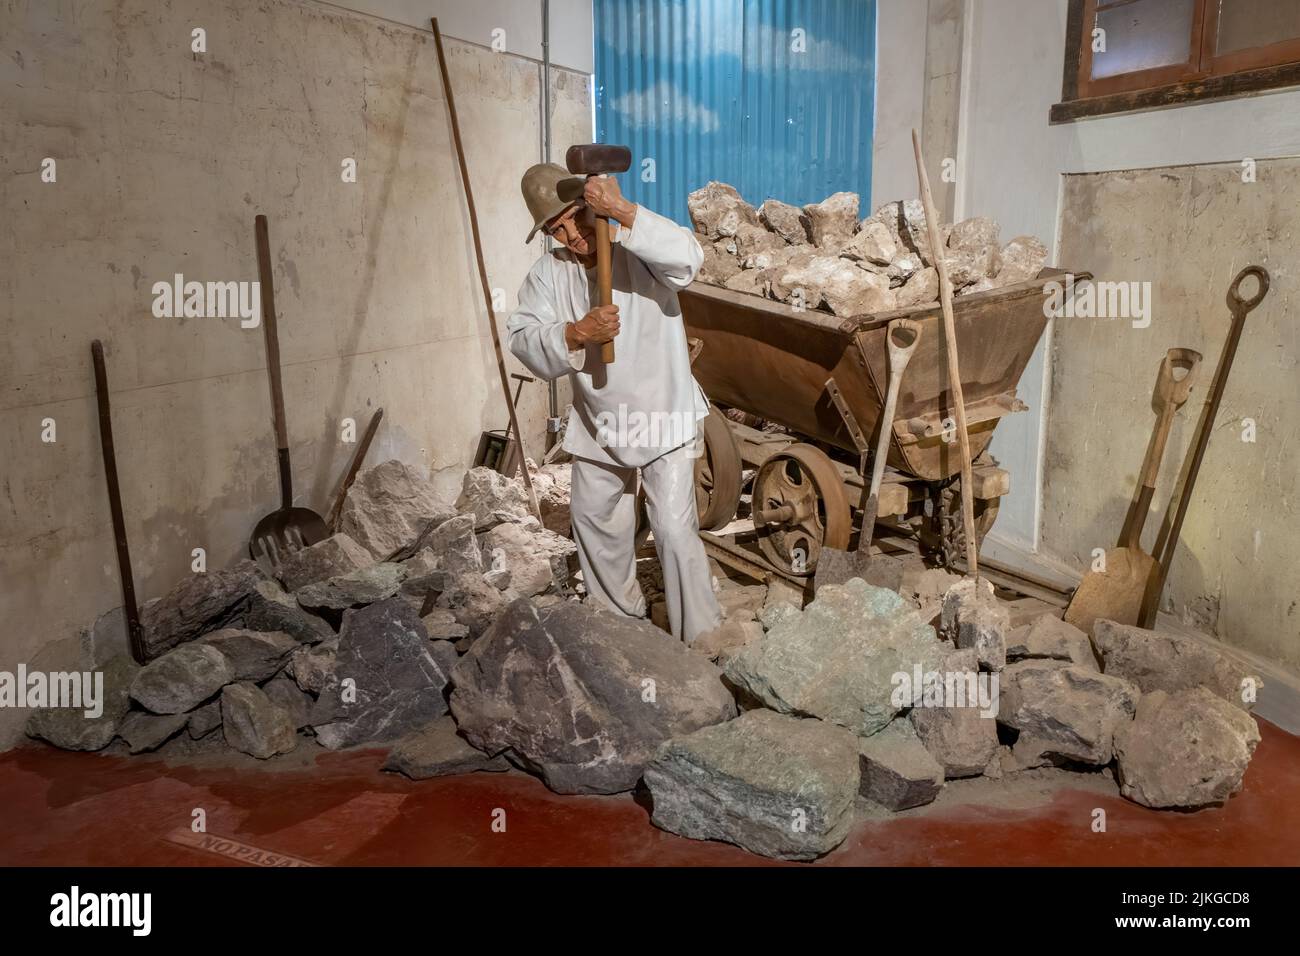 Display with a mannequin showing a laborer breaking up caliche rock for transport in the museum at Humberstone, Chile. Stock Photo